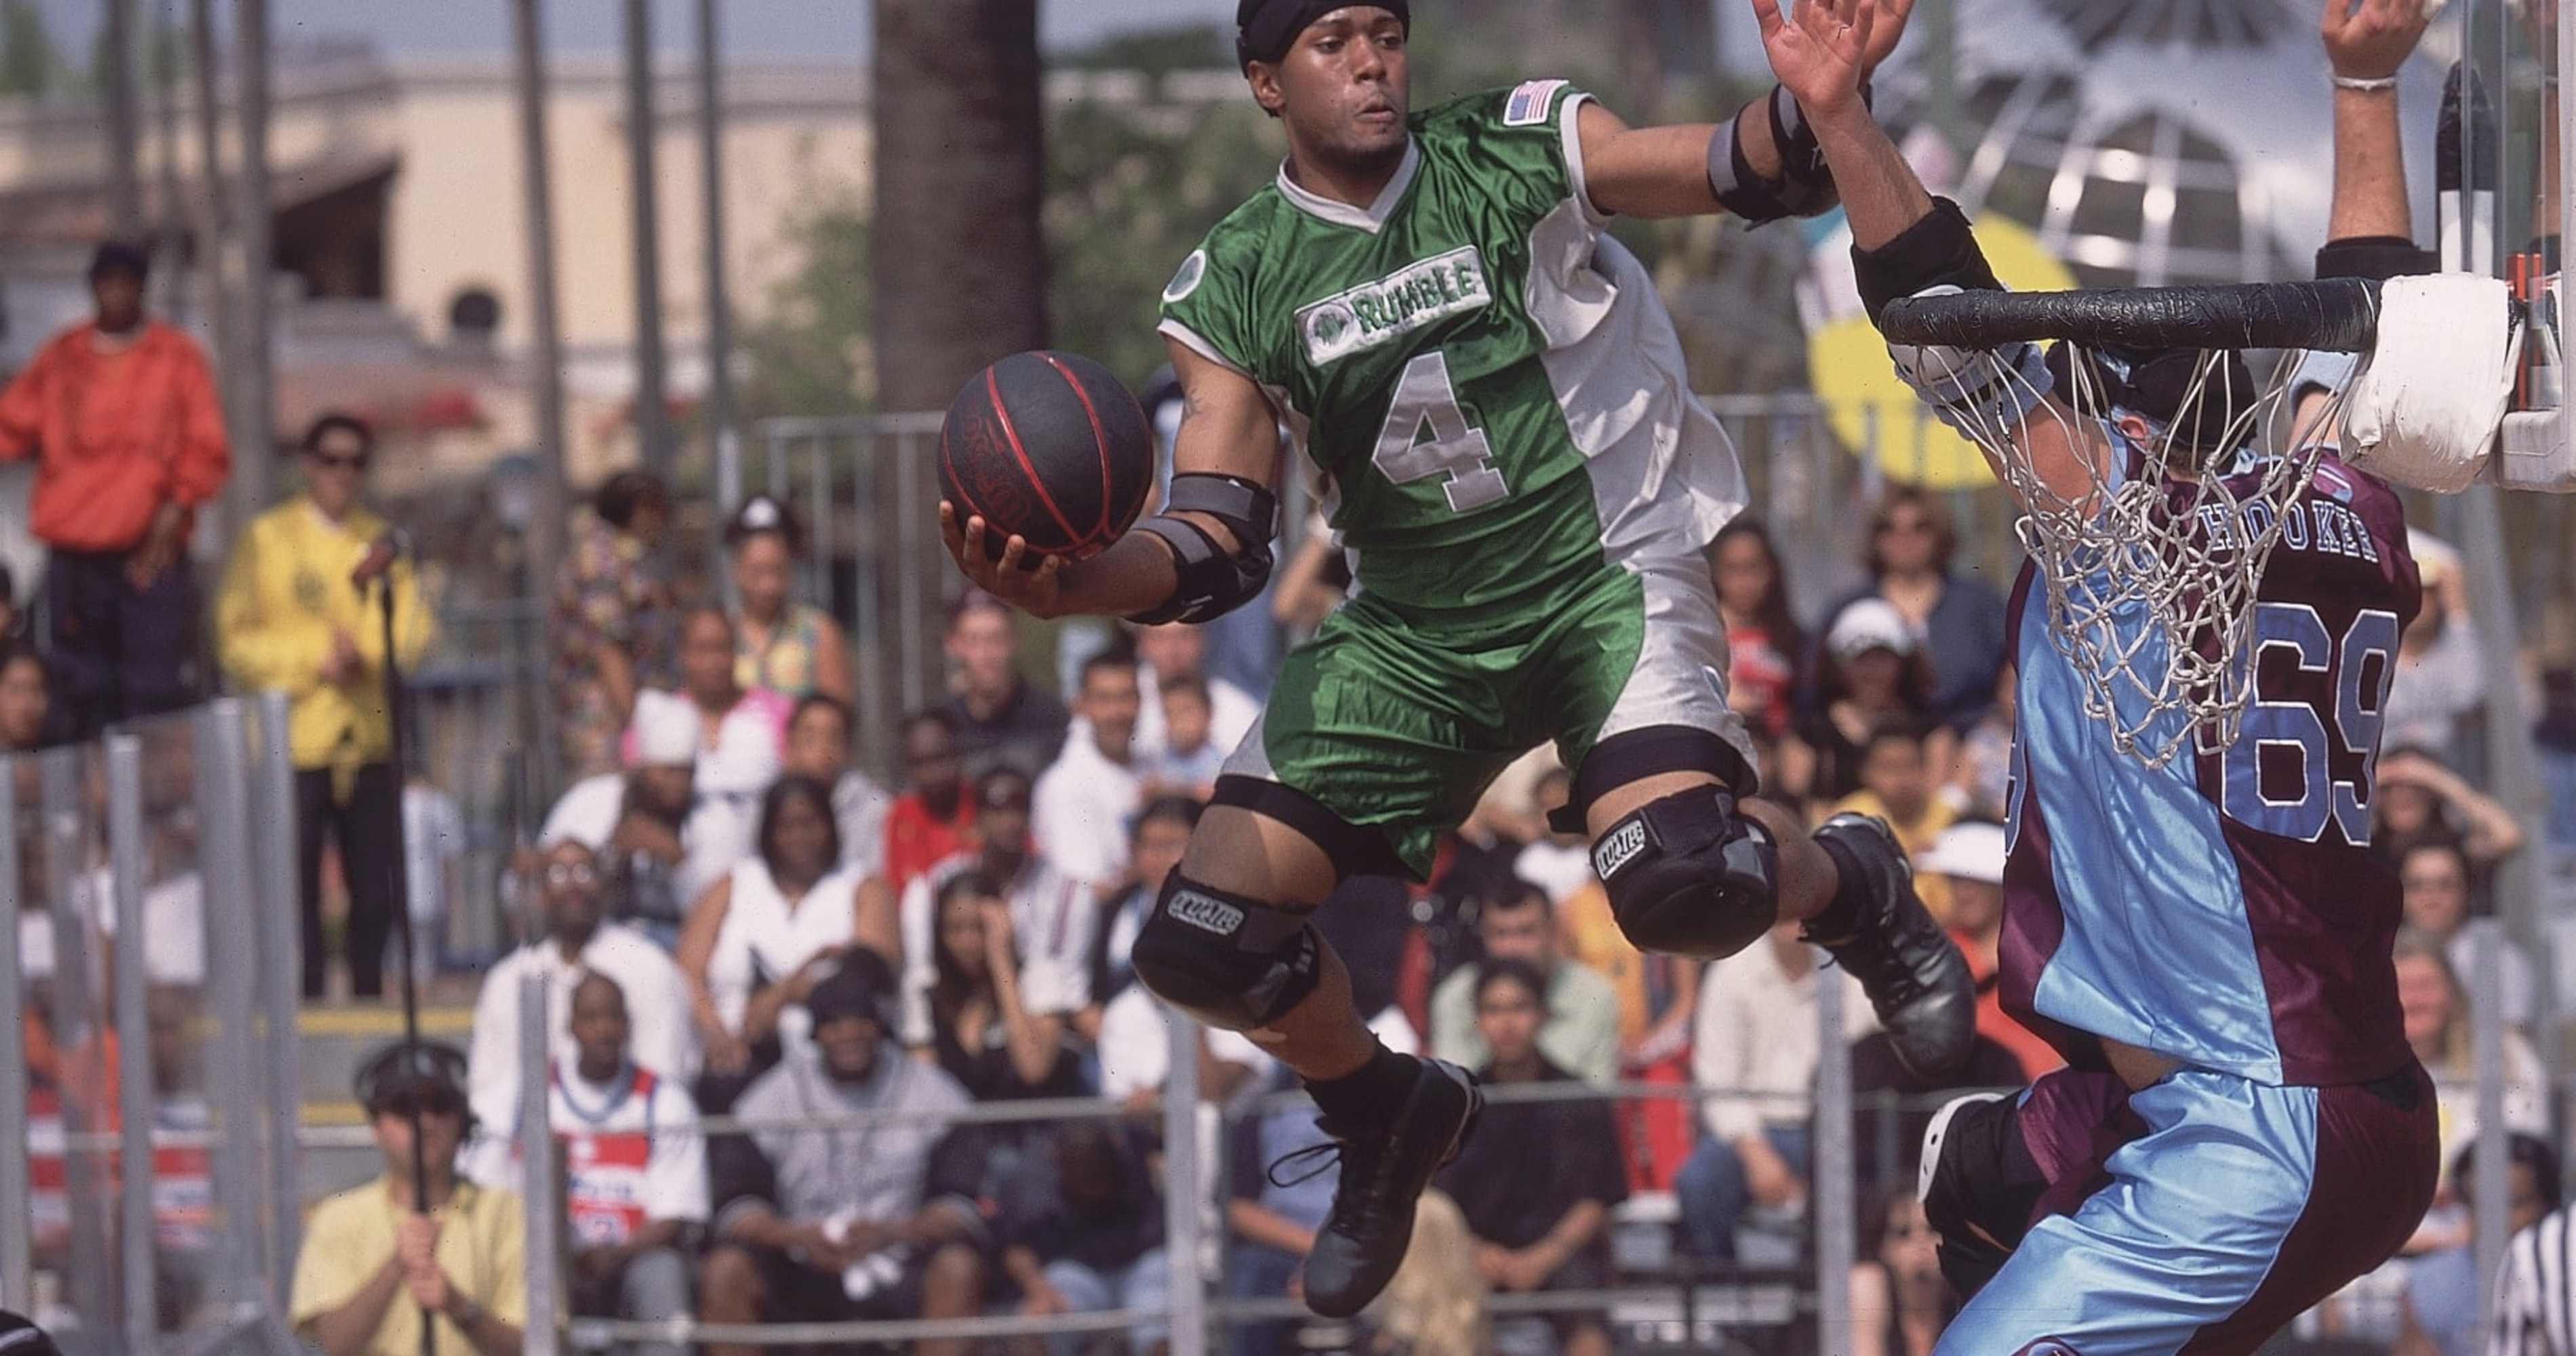 SlamBall Is Back. Can It Survive?